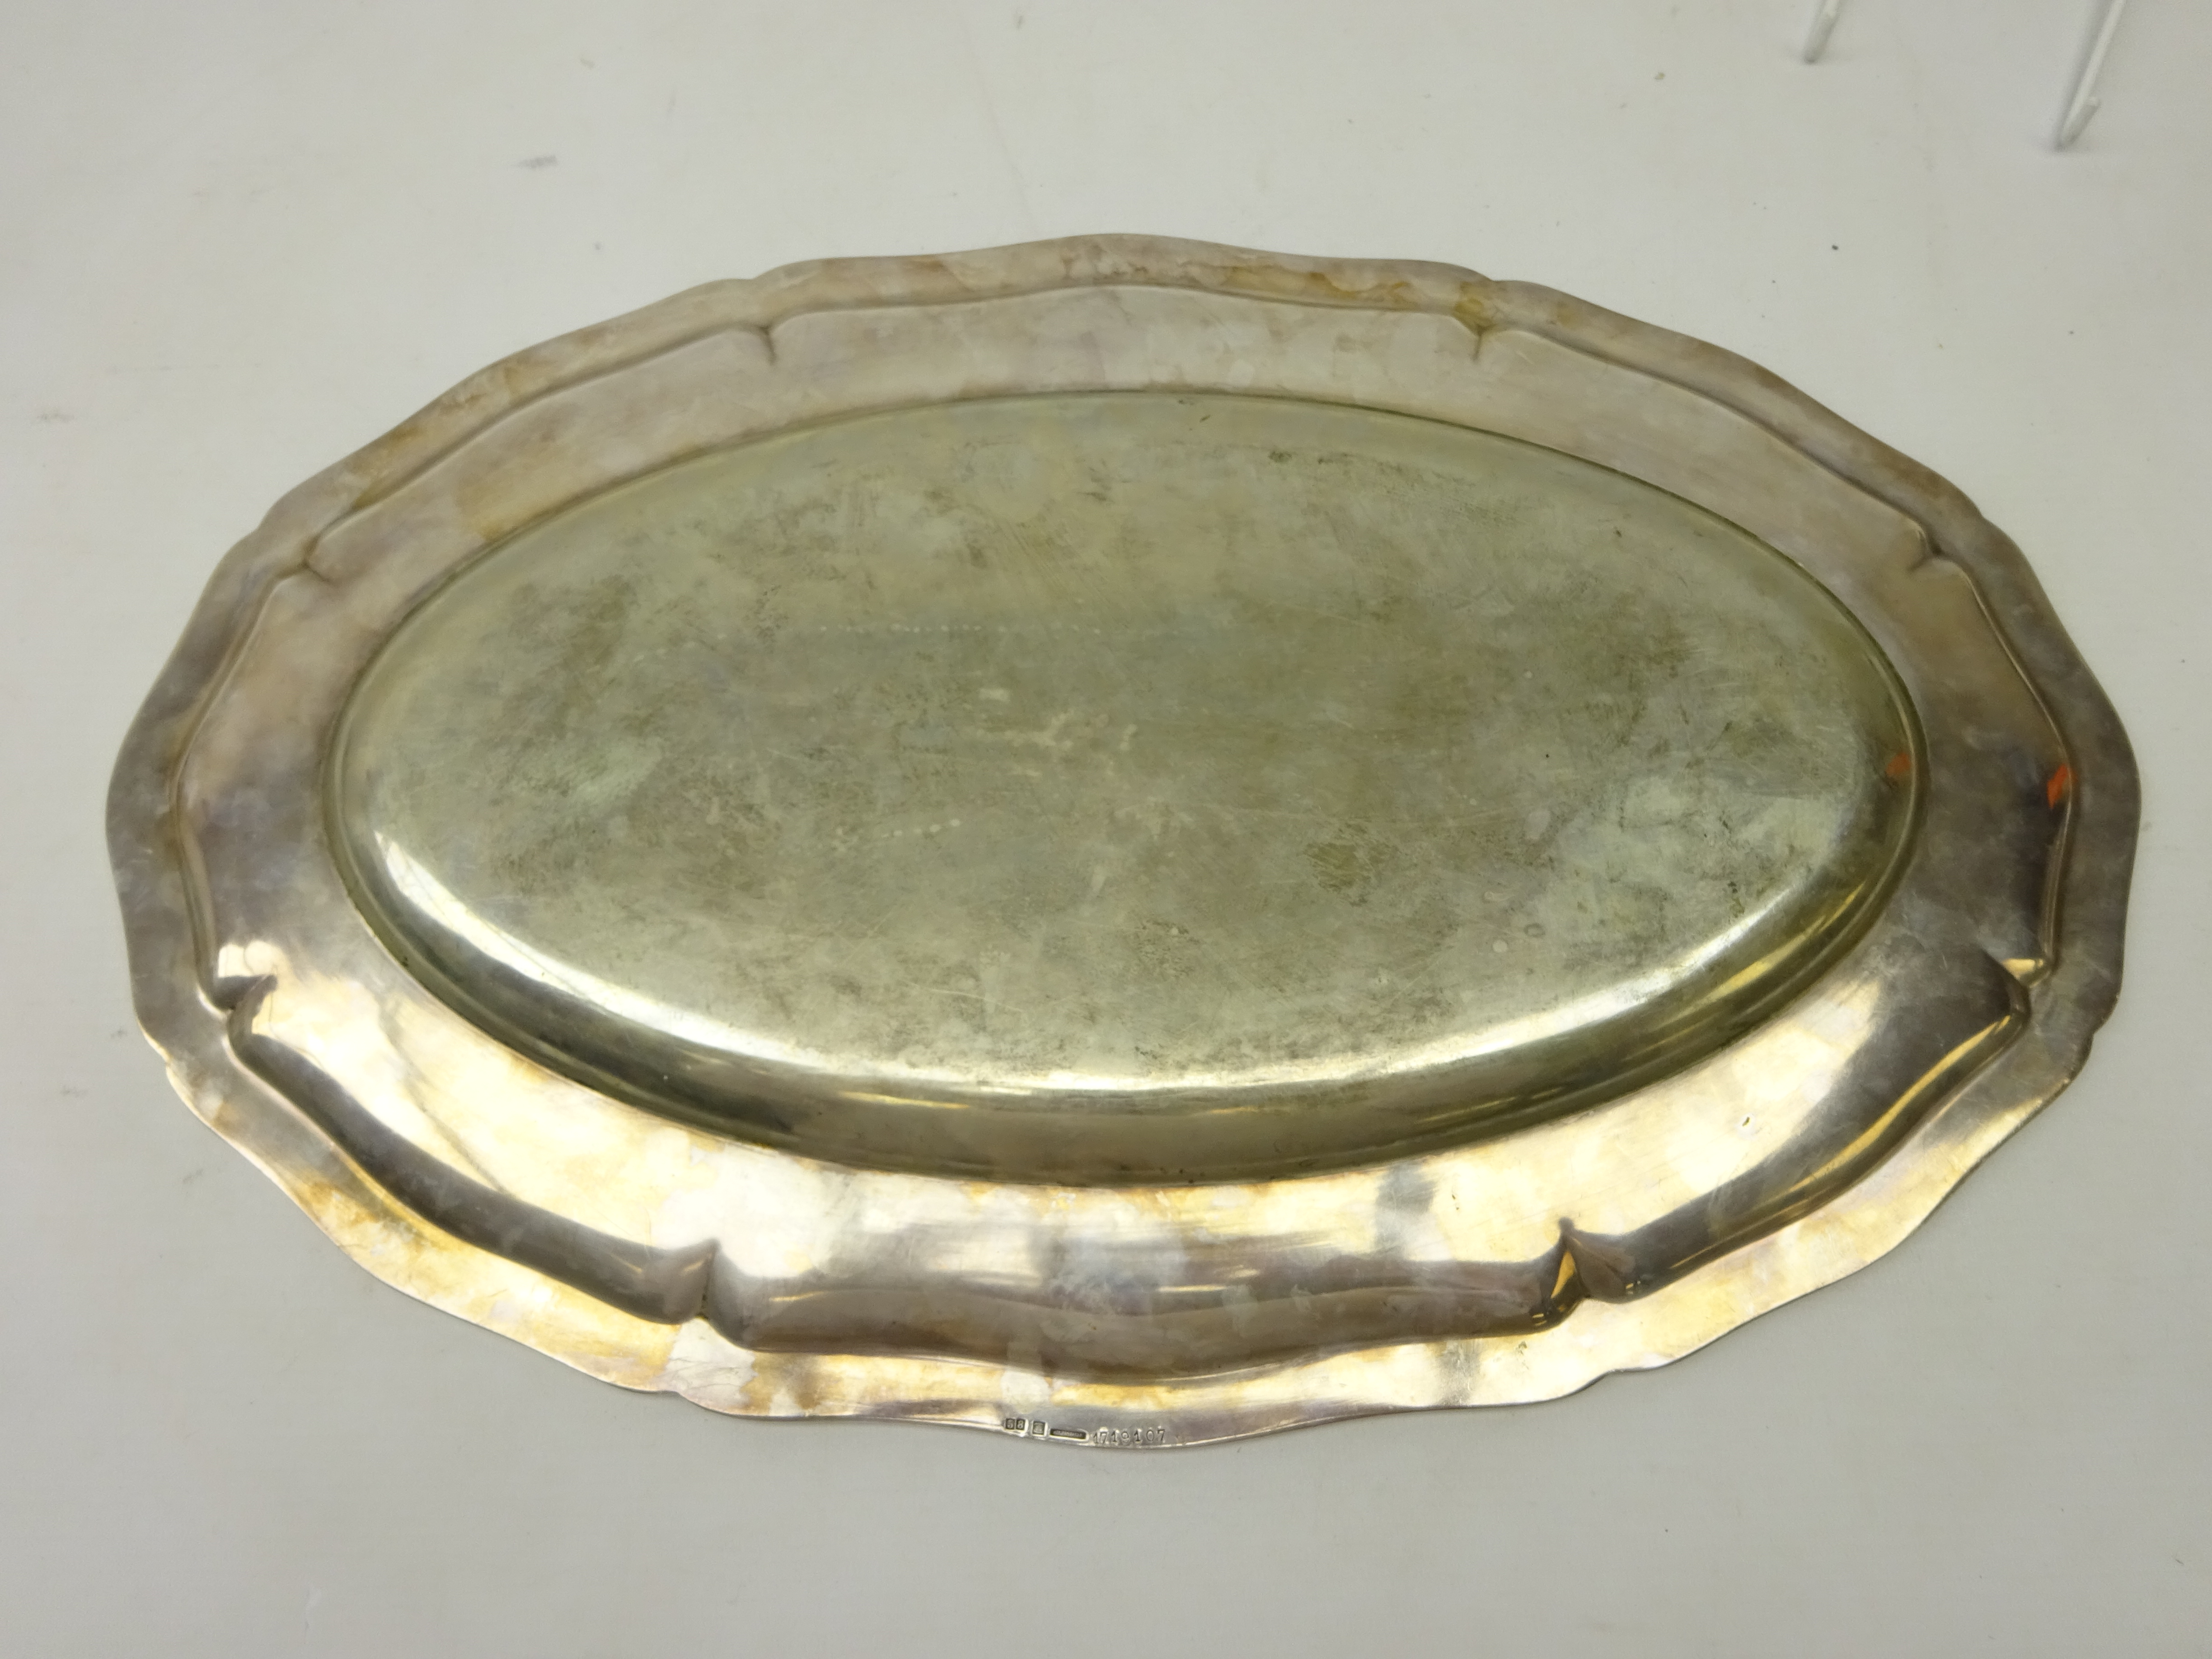 Late 19th century Christofle silver-plated tureen and cover with scalloped edge, - Image 8 of 18